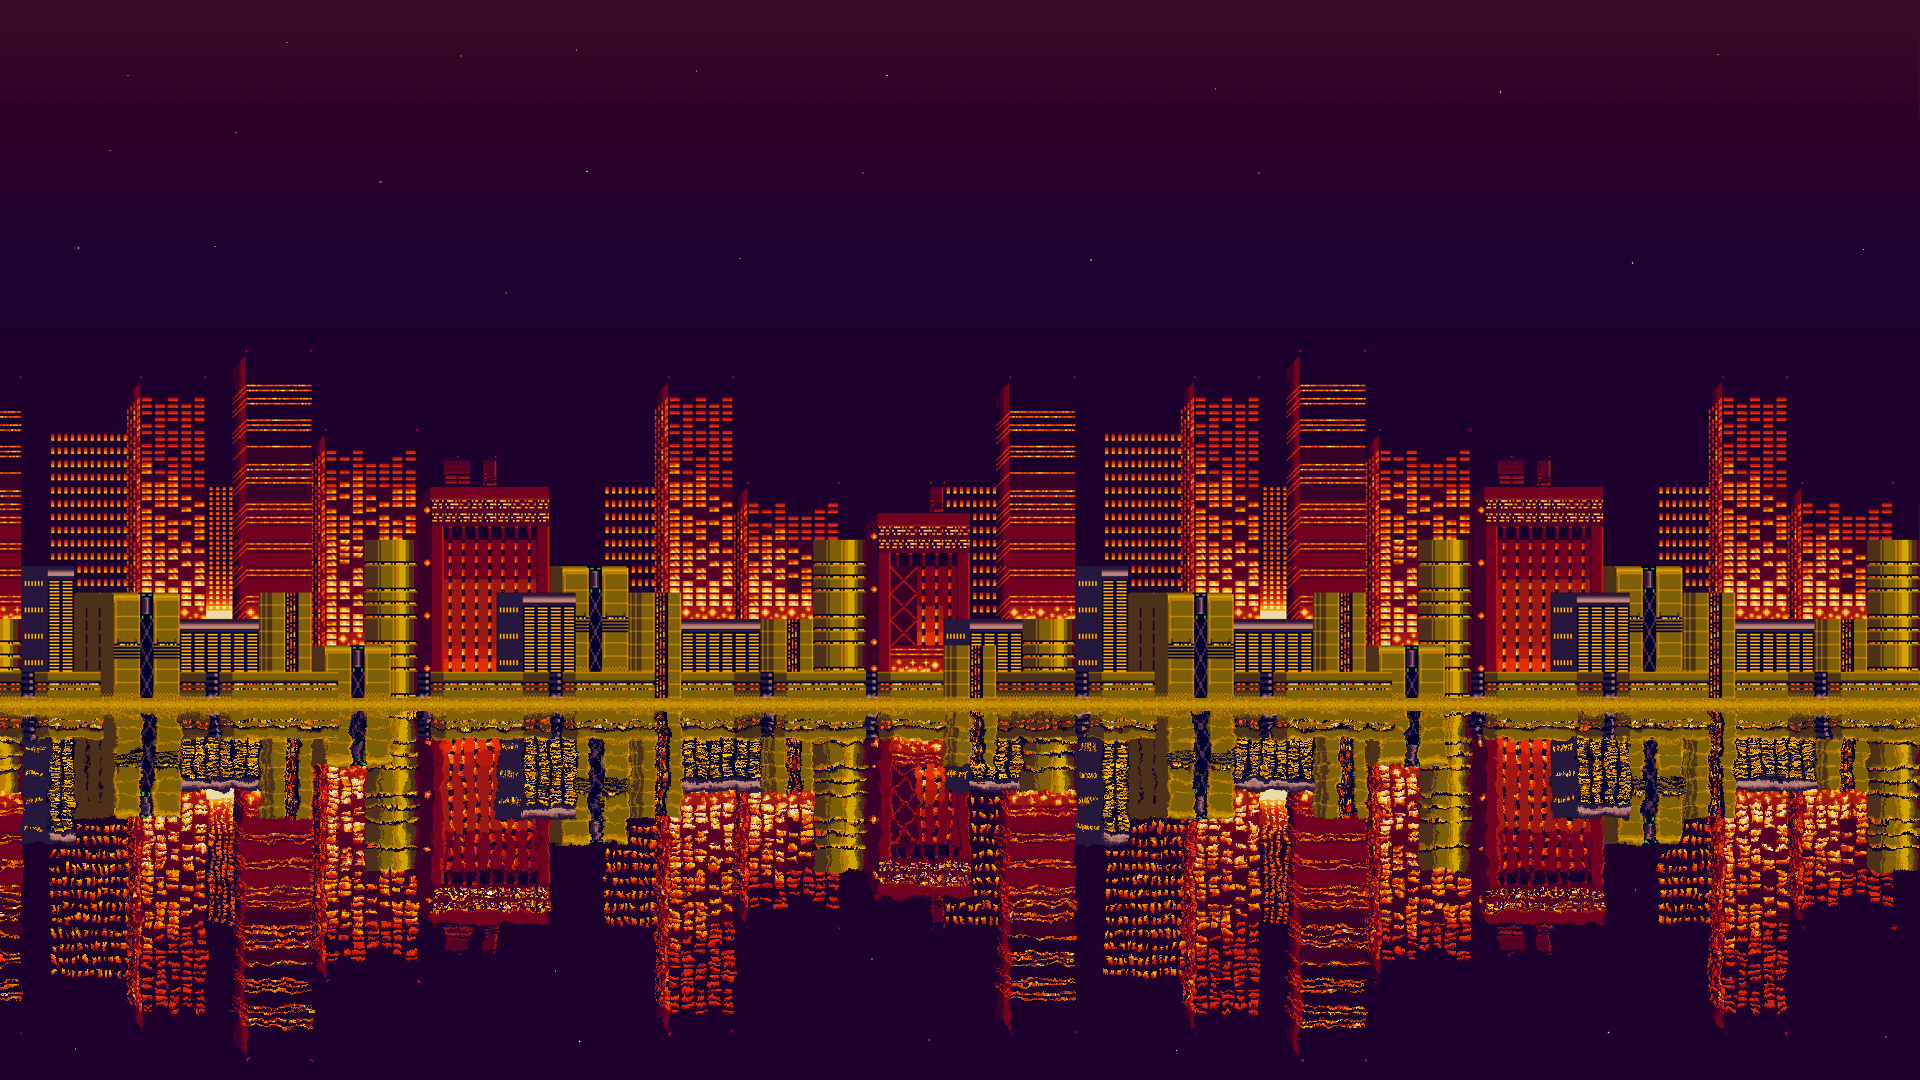 I made a wallpaper based off Chemical Plant's background